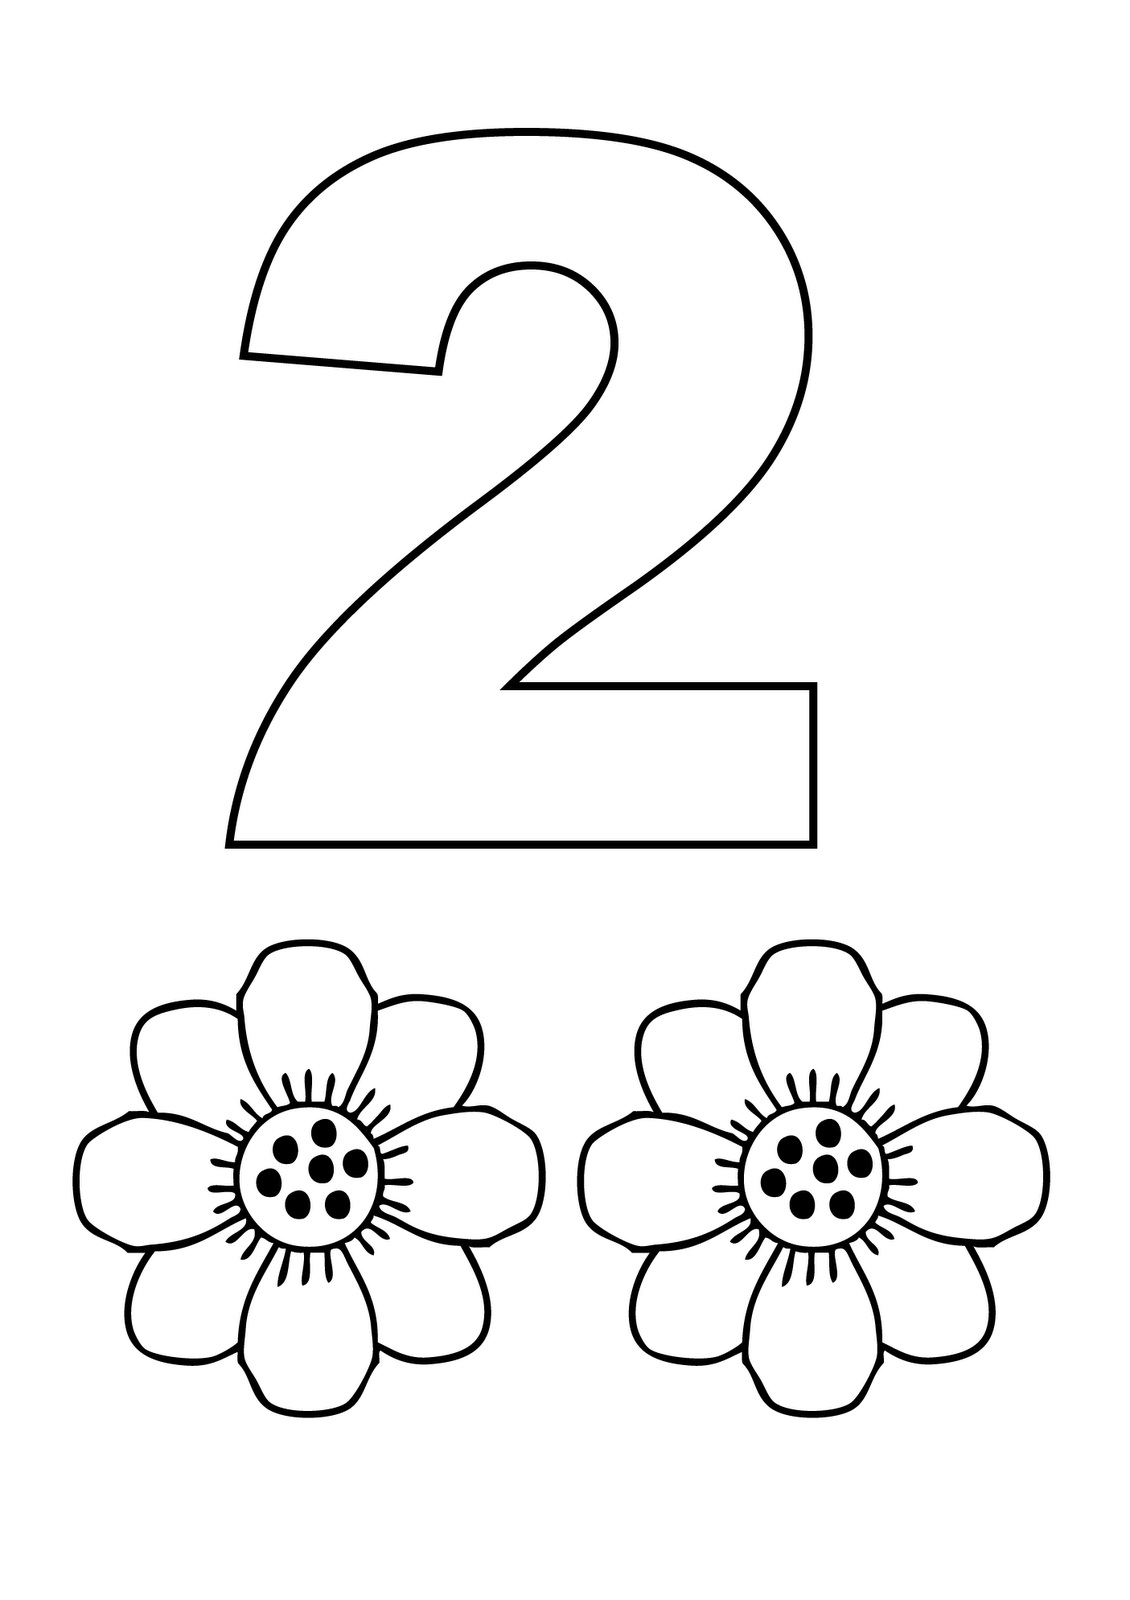 Download Free Printable Number Coloring Pages For Kids